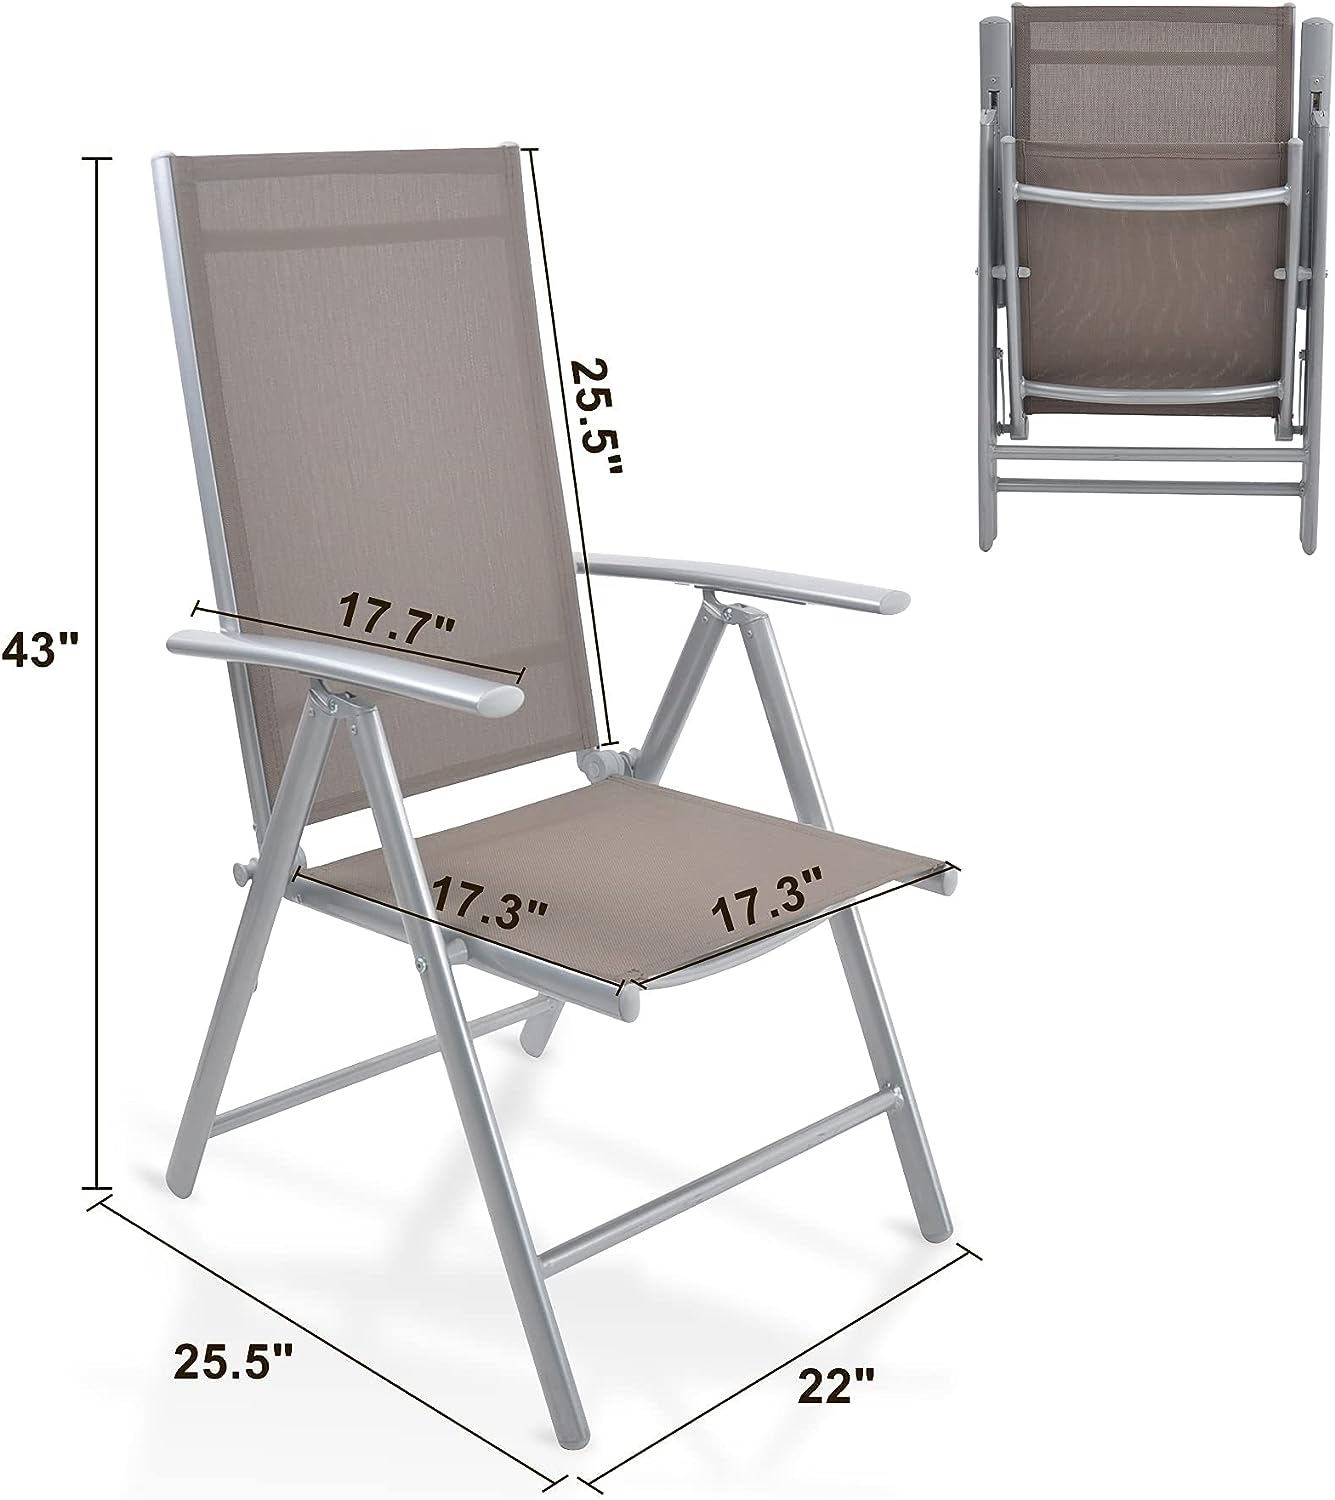 Set of 2 Patio Folding Sling Back Chairs Aluminum with Adjustable Reclining Back